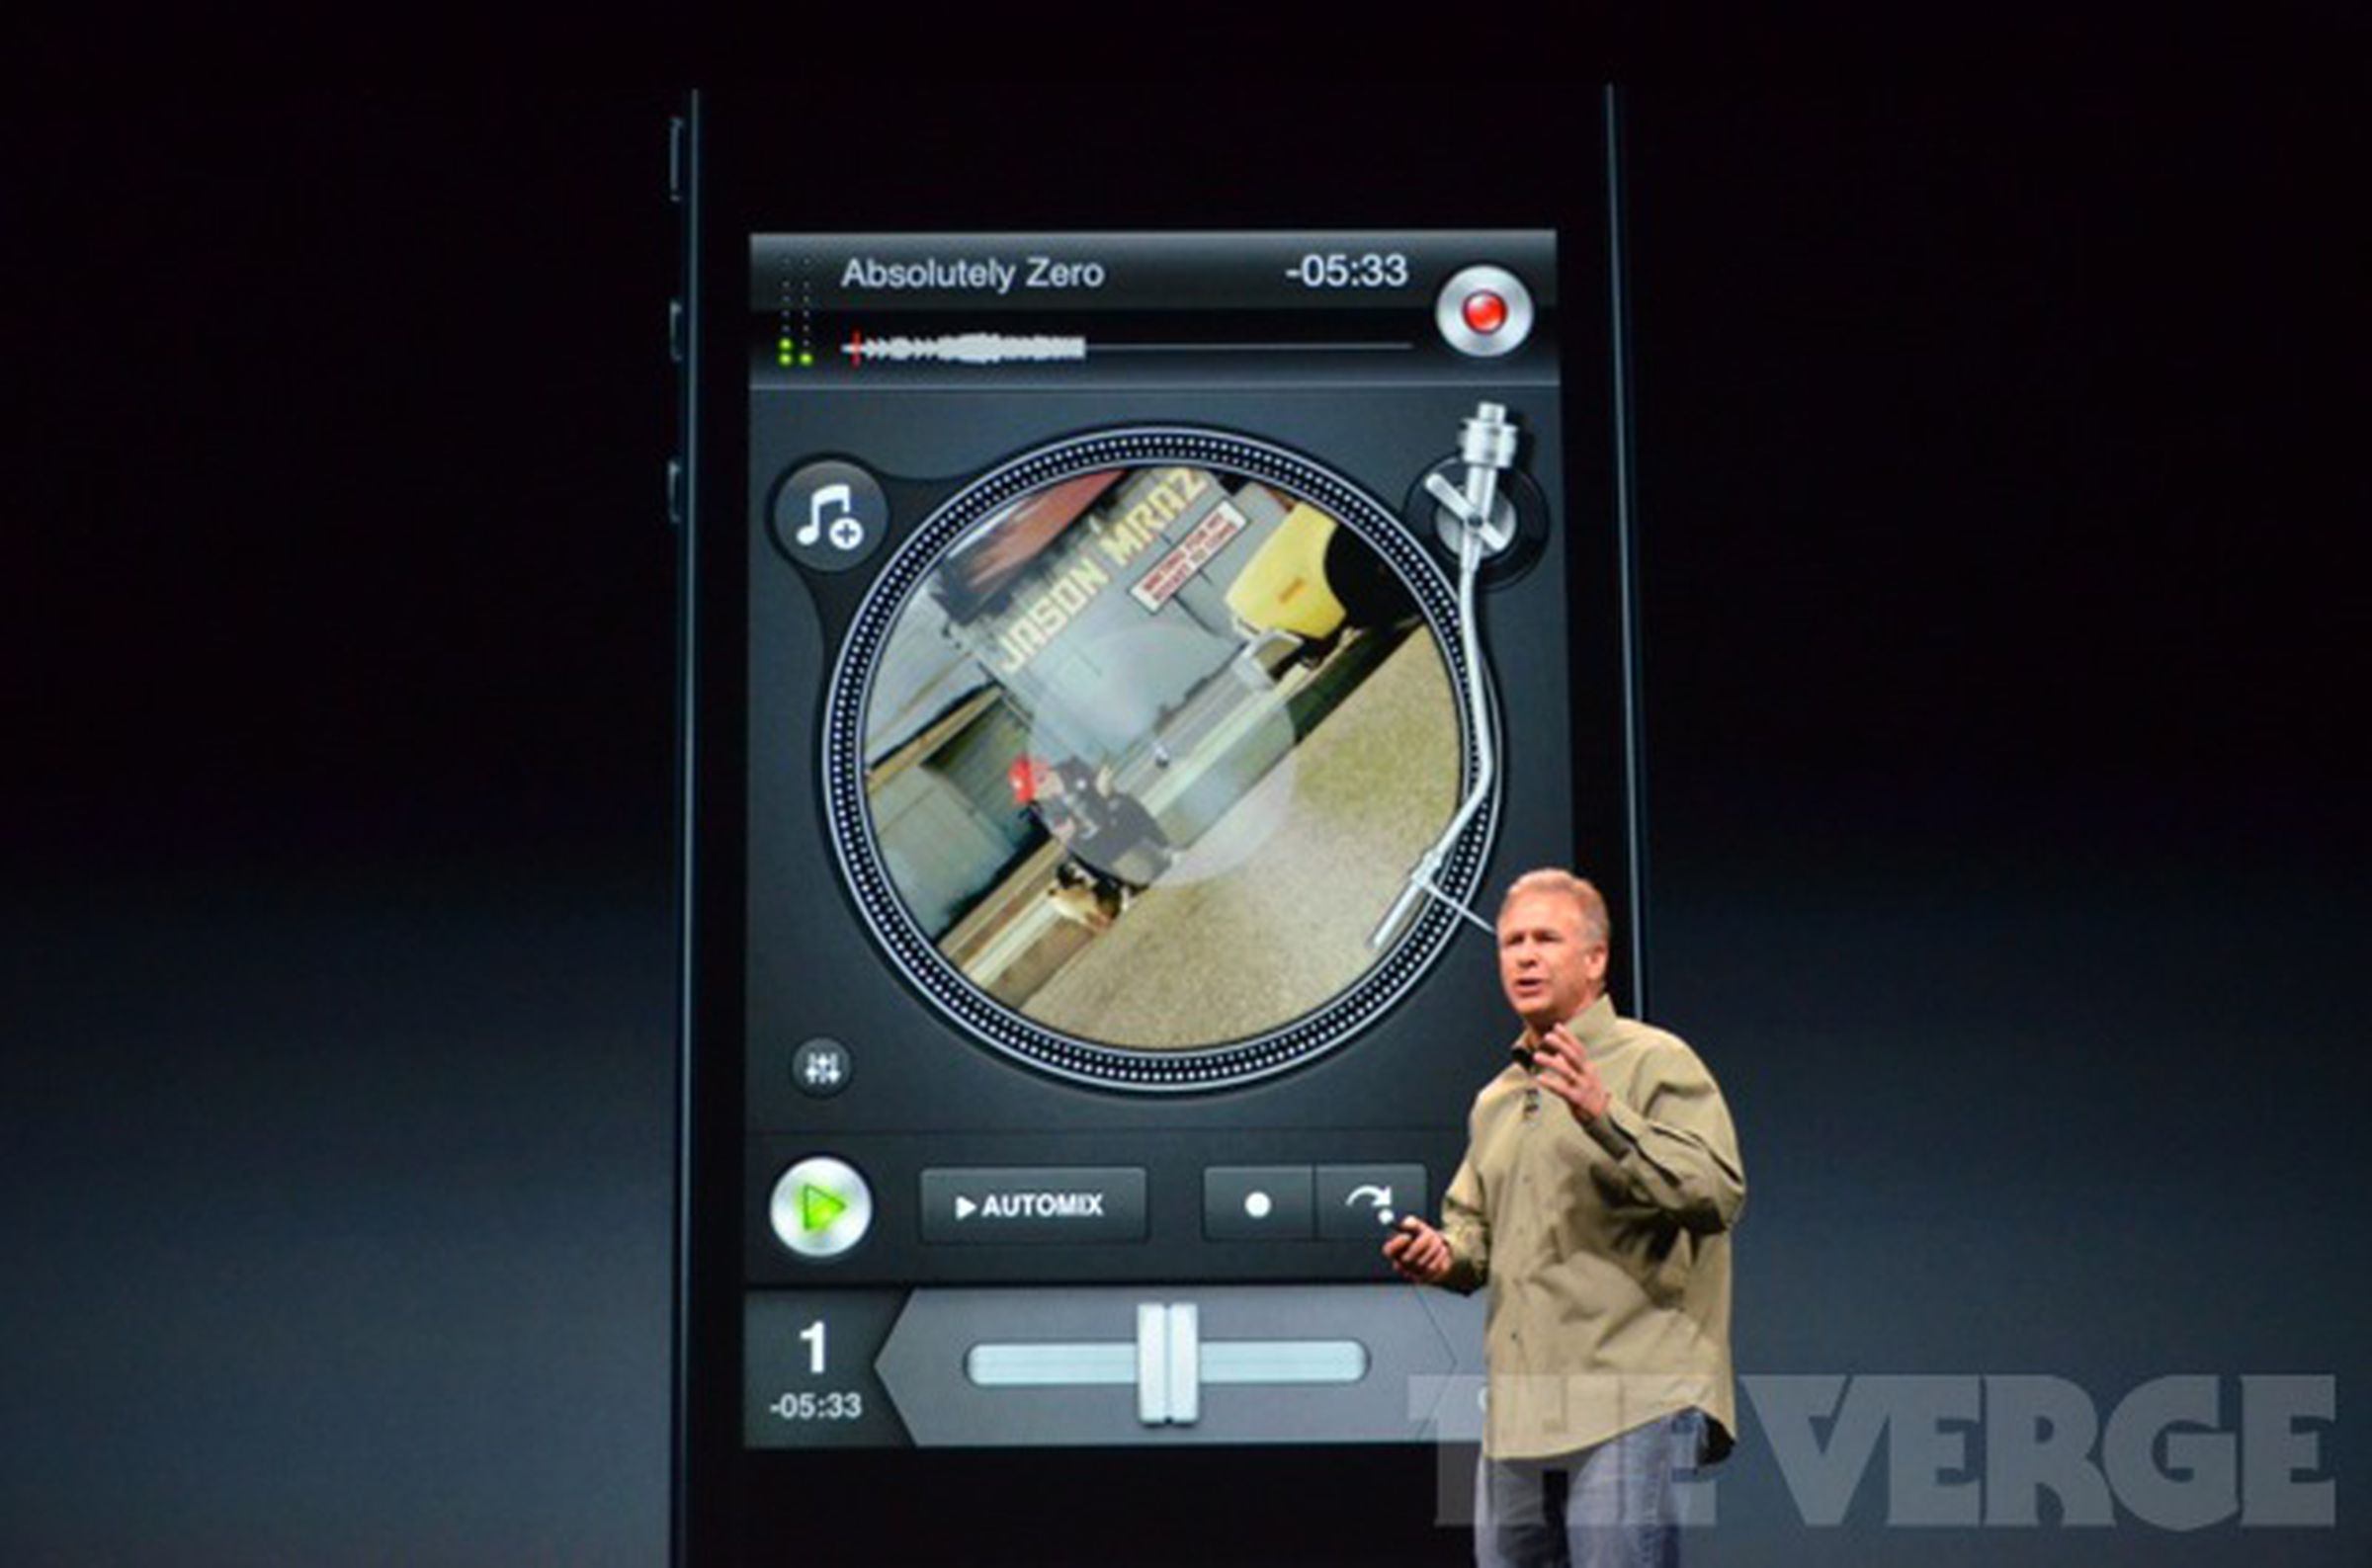 Liveblog images of optimized apps for Apple's iPhone 5